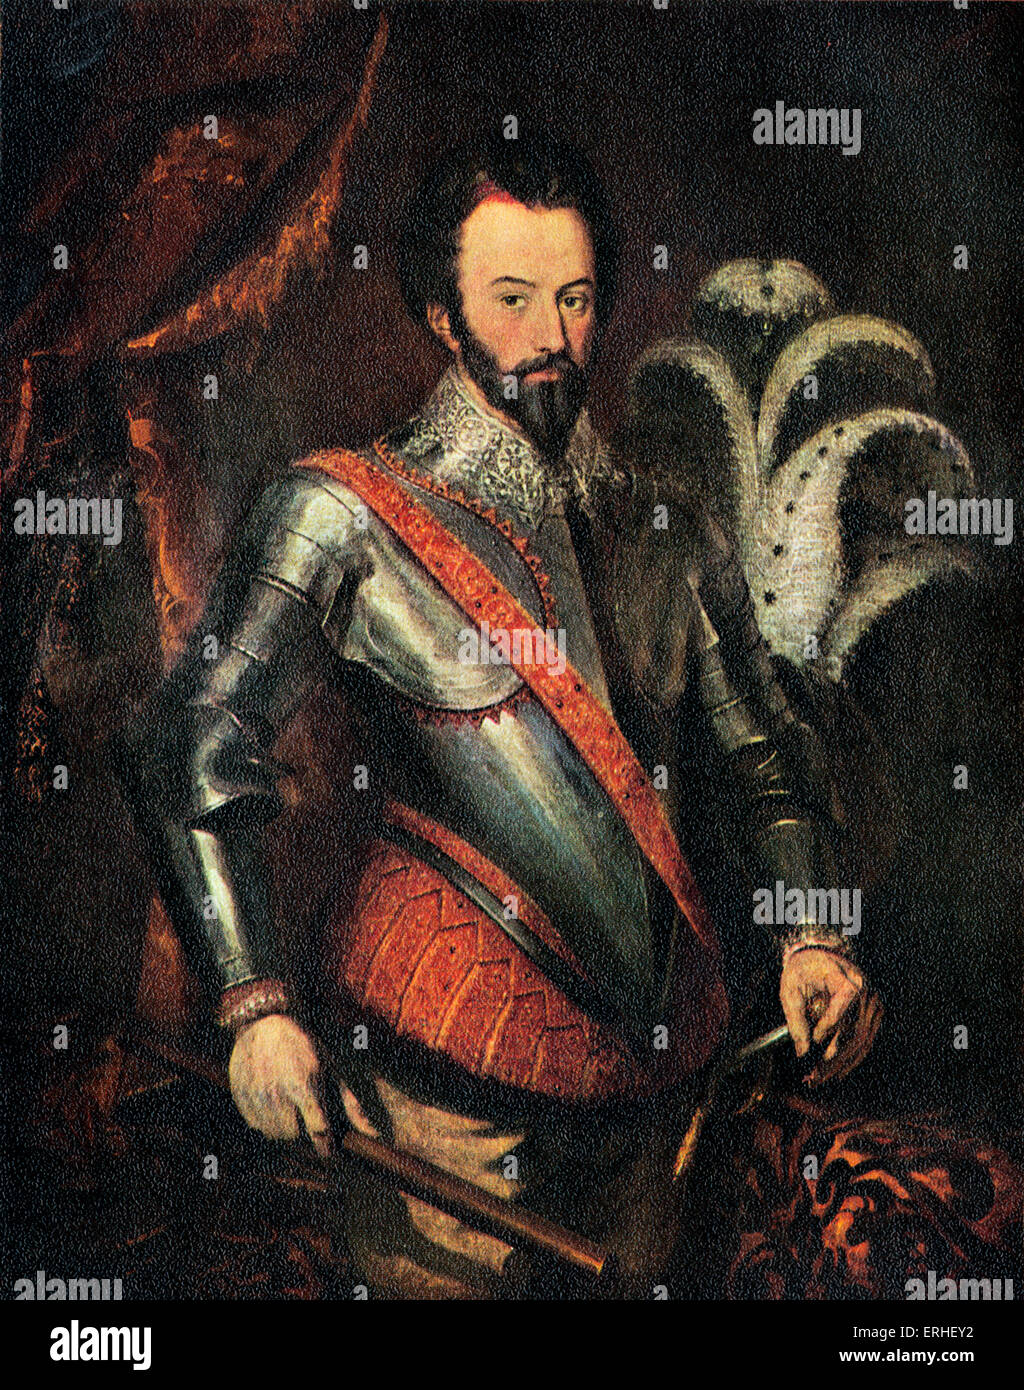 Sir Walter Raleigh - portrait of the English soldier, explorer, courtier and writer 1552-1618. Oil painting by Hubert L. Smith, Oriel College, Oxford. Connection with Elizabeth I Stock Photo